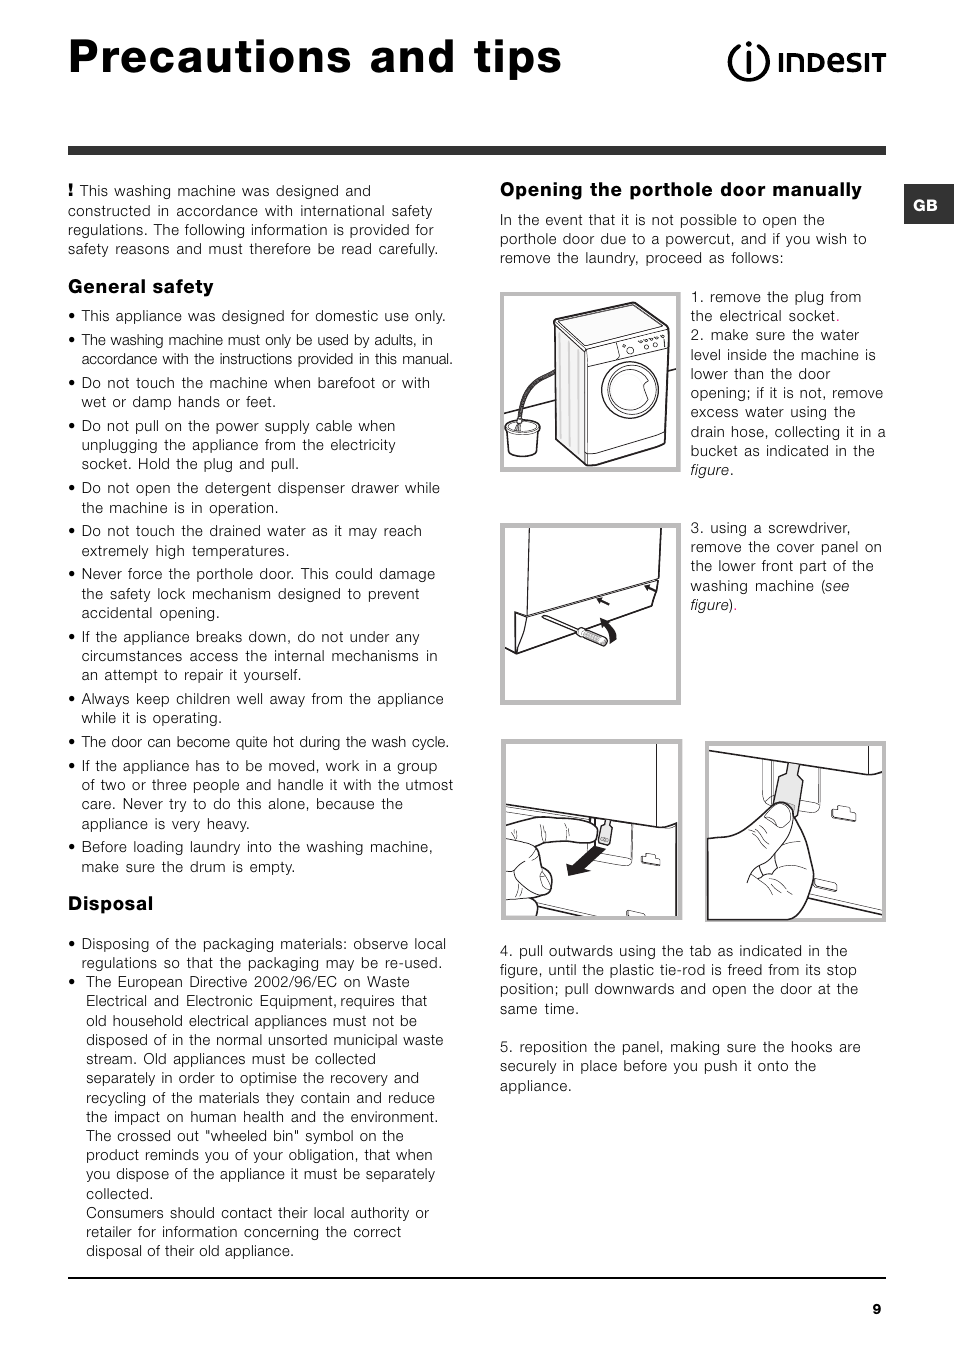 Precautions and tips, General safety, Disposal | Indesit IWC-5105-(EU) User  Manual | Page 9 / 84 | Original mode